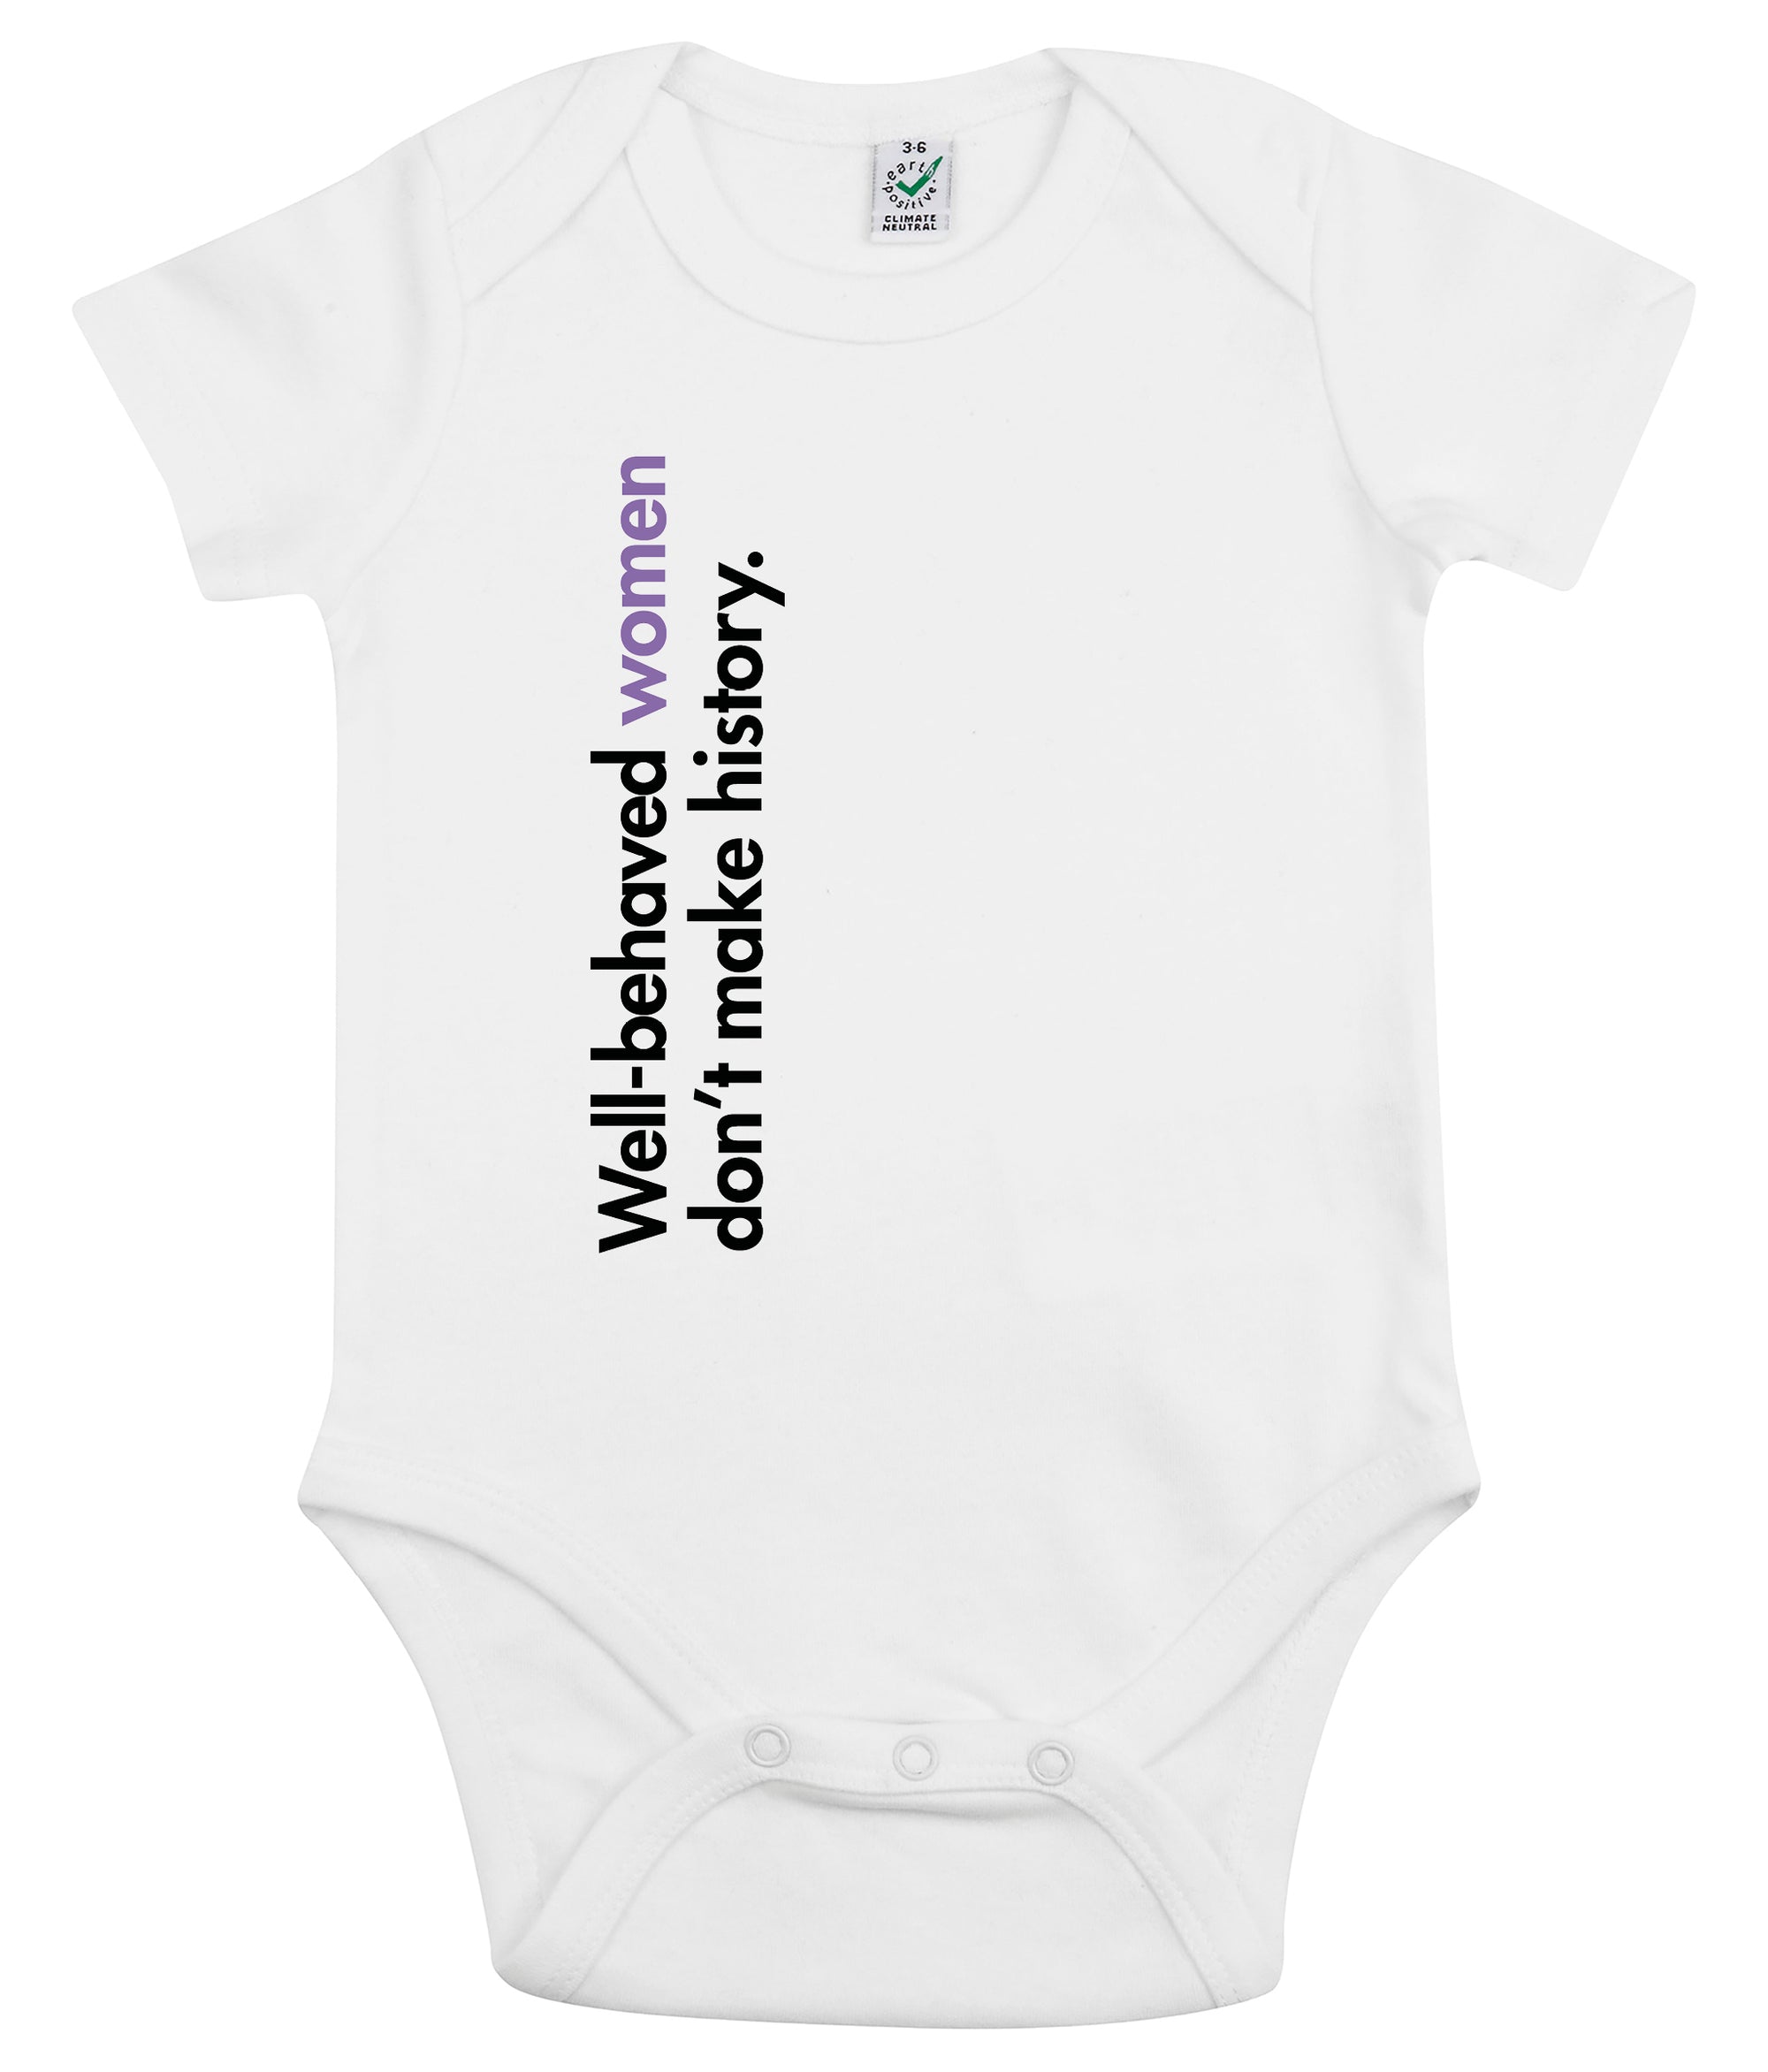 Well Behaved Women Don't Make History Organic Combed Cotton Babygrow White